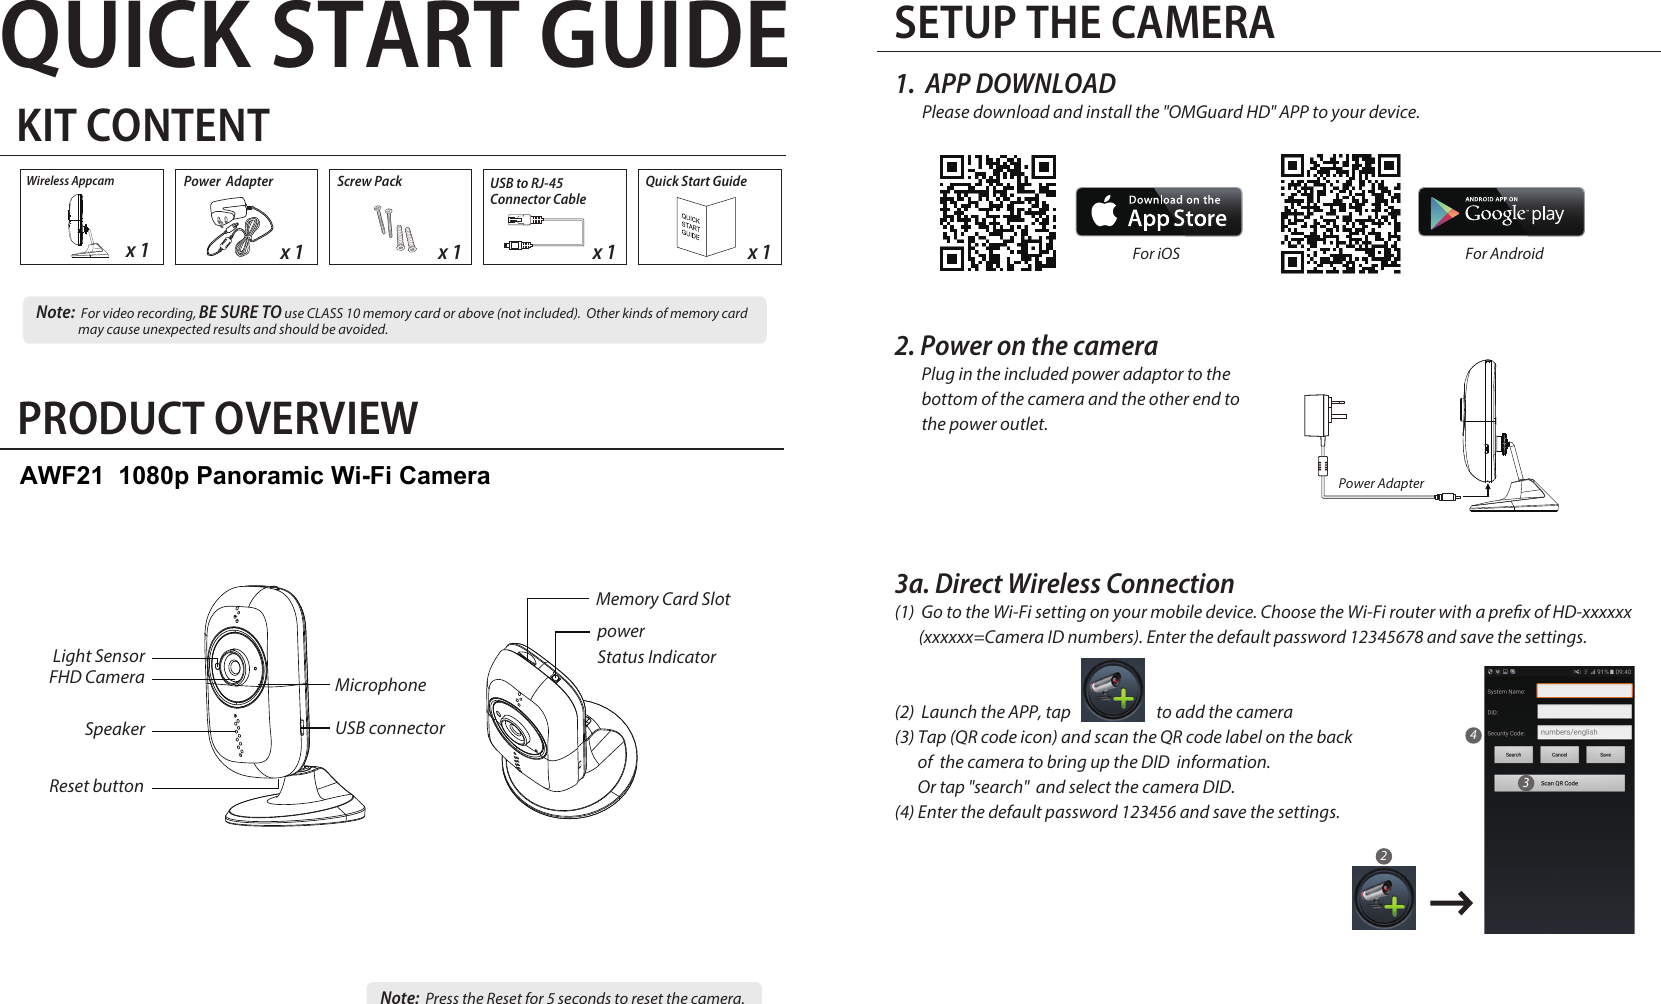 QUICK START GUIDEKIT CONTENTx 1 x 1Quick Start GuidePower  Adapterx 1SETUP THE CAMERA1. APP DOWNLOADPlease download and install the &quot;OMGuard HD&quot; APP to your device. 2. Power on the cameraPlug in the included power adaptor to the bottom of the camera and the other end to the power outlet.PRODUCT OVERVIEW3a. Direct Wireless Connection(1)  Go to the Wi-Fi setting on your mobile device. Choose the Wi-Fi router with a prex of HD-xxxxxx        (xxxxxx=Camera ID numbers). Enter the default password 12345678 and save the settings.(2)  Launch the APP, tap                         to add the camera(3) Tap (QR code icon) and scan the QR code label on the backof  the camera to bring up the DID  information. Or tap &quot;search&quot;  and select the camera DID. (4) Enter the default password 123456 and save the settings. Wireless Appcamx 1          Note:  For video recording, BE SURE TO use CLASS 10 memory card or above (not included).  Other kinds of memory card may cause unexpected results and should be avoided.Note:  Press the Reset for 5 seconds to reset the camera. x 1Screw PackPower AdapterReset buttonFHD CameraLight SensorSpeakerMicrophoneUSB connector For iOS  For Android 234powerStatus IndicatorMemory Card SlotUSB to RJ-45 Connector CableAWF21  1080p Panoramic Wi-Fi Camera